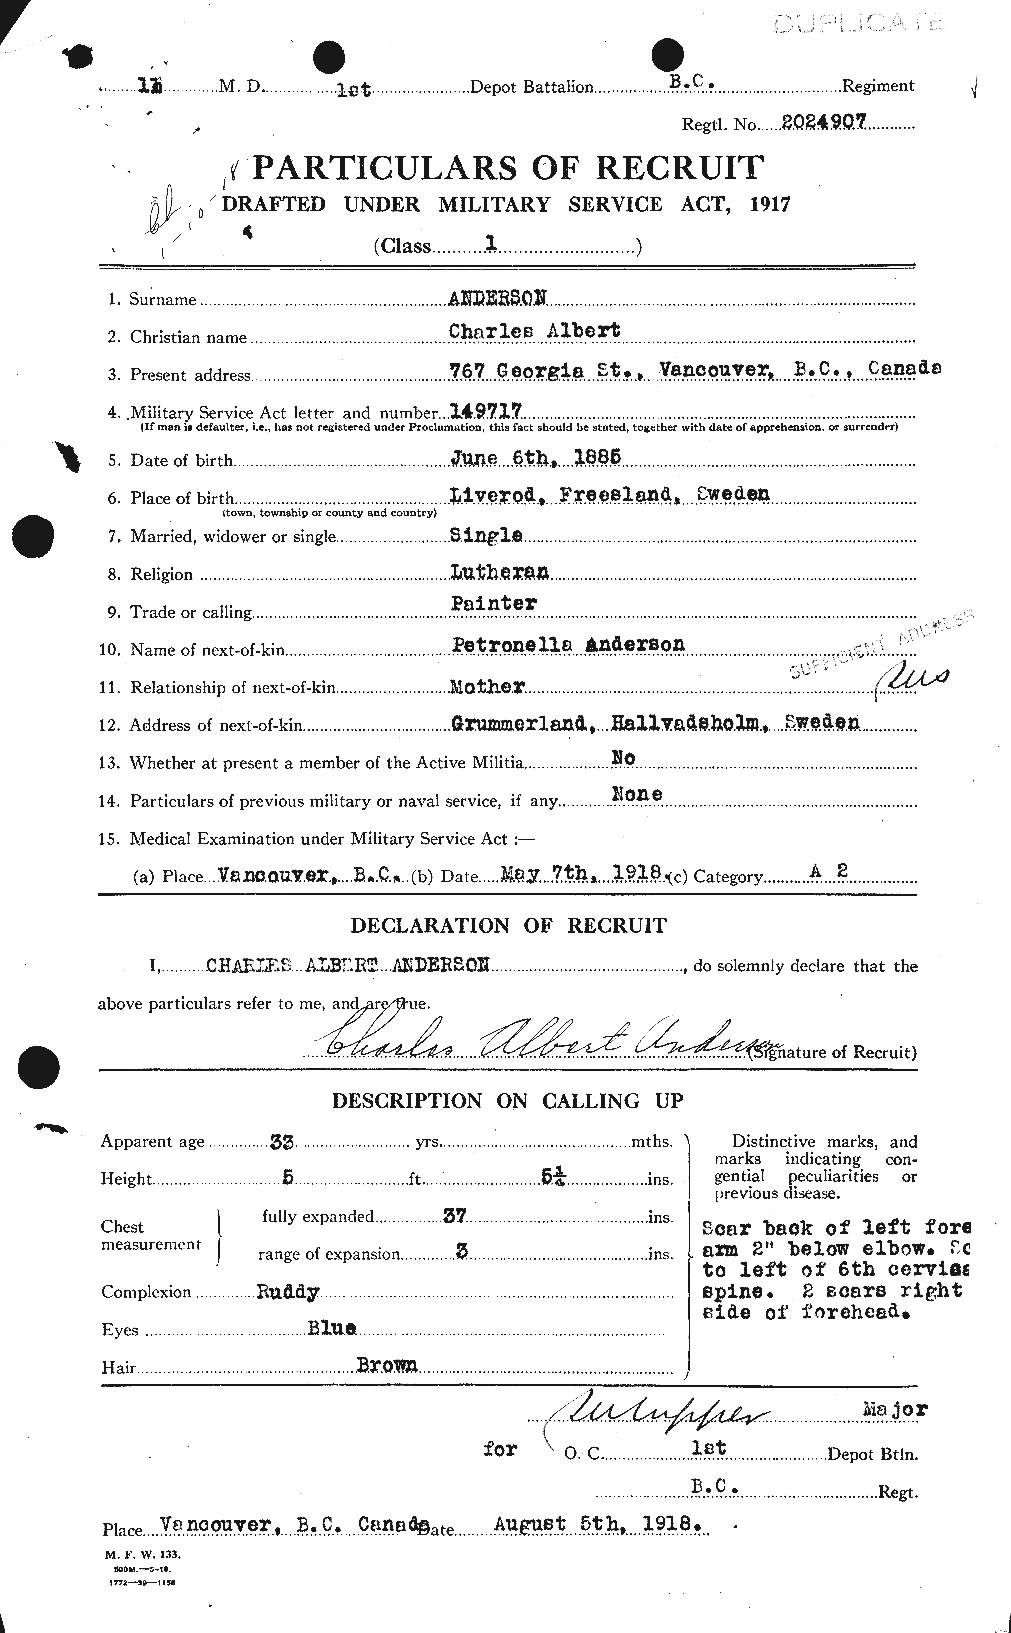 Personnel Records of the First World War - CEF 209249a